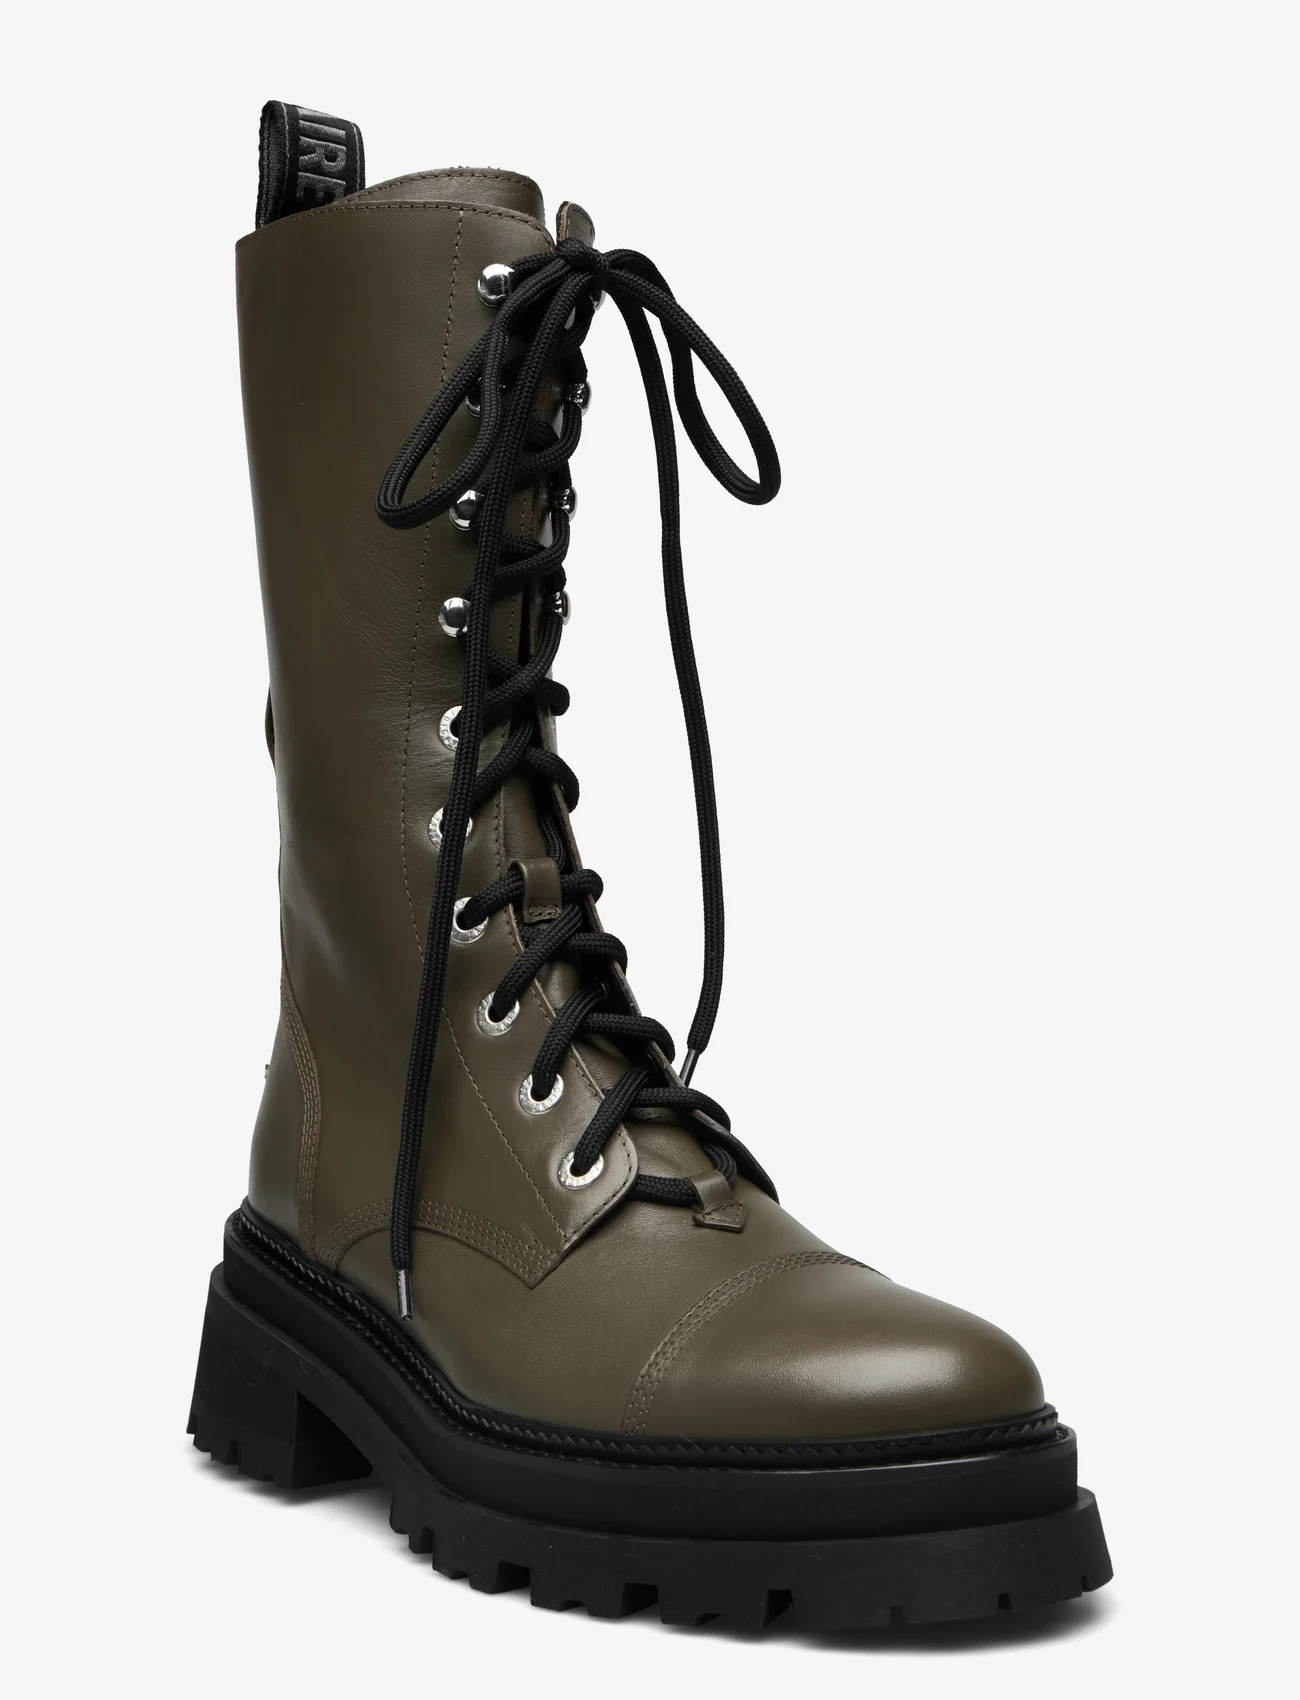 Zadig & Voltaire - RIDE SEMY-SHINY CALFSKIN - laced boots - military - 0